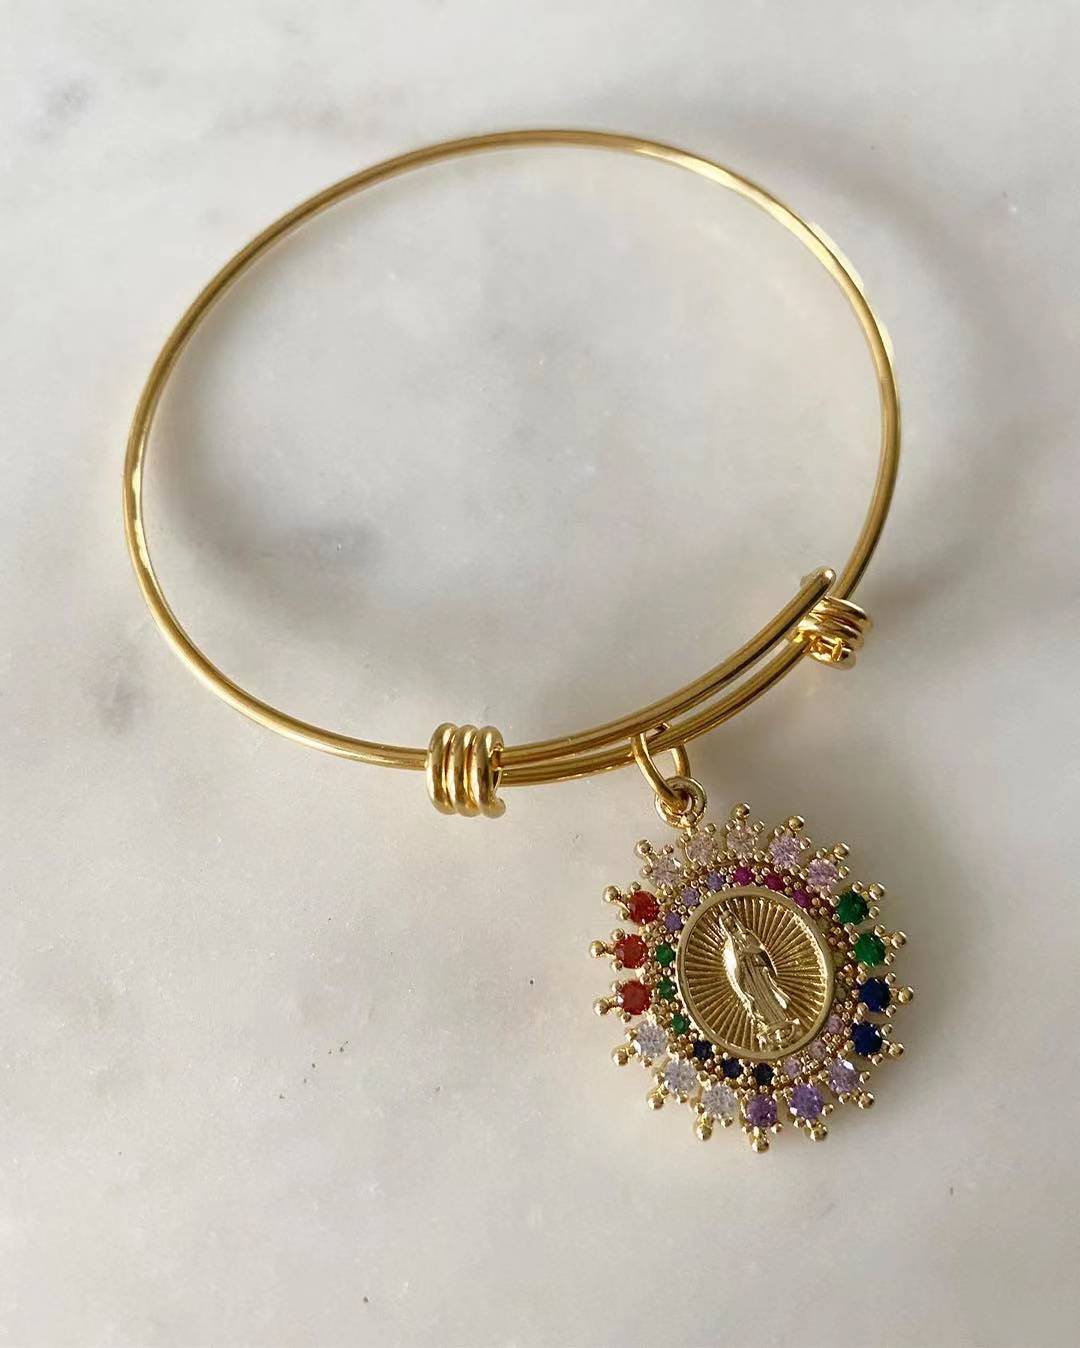 Multicolored Our Lady of Guadalupe Bangle